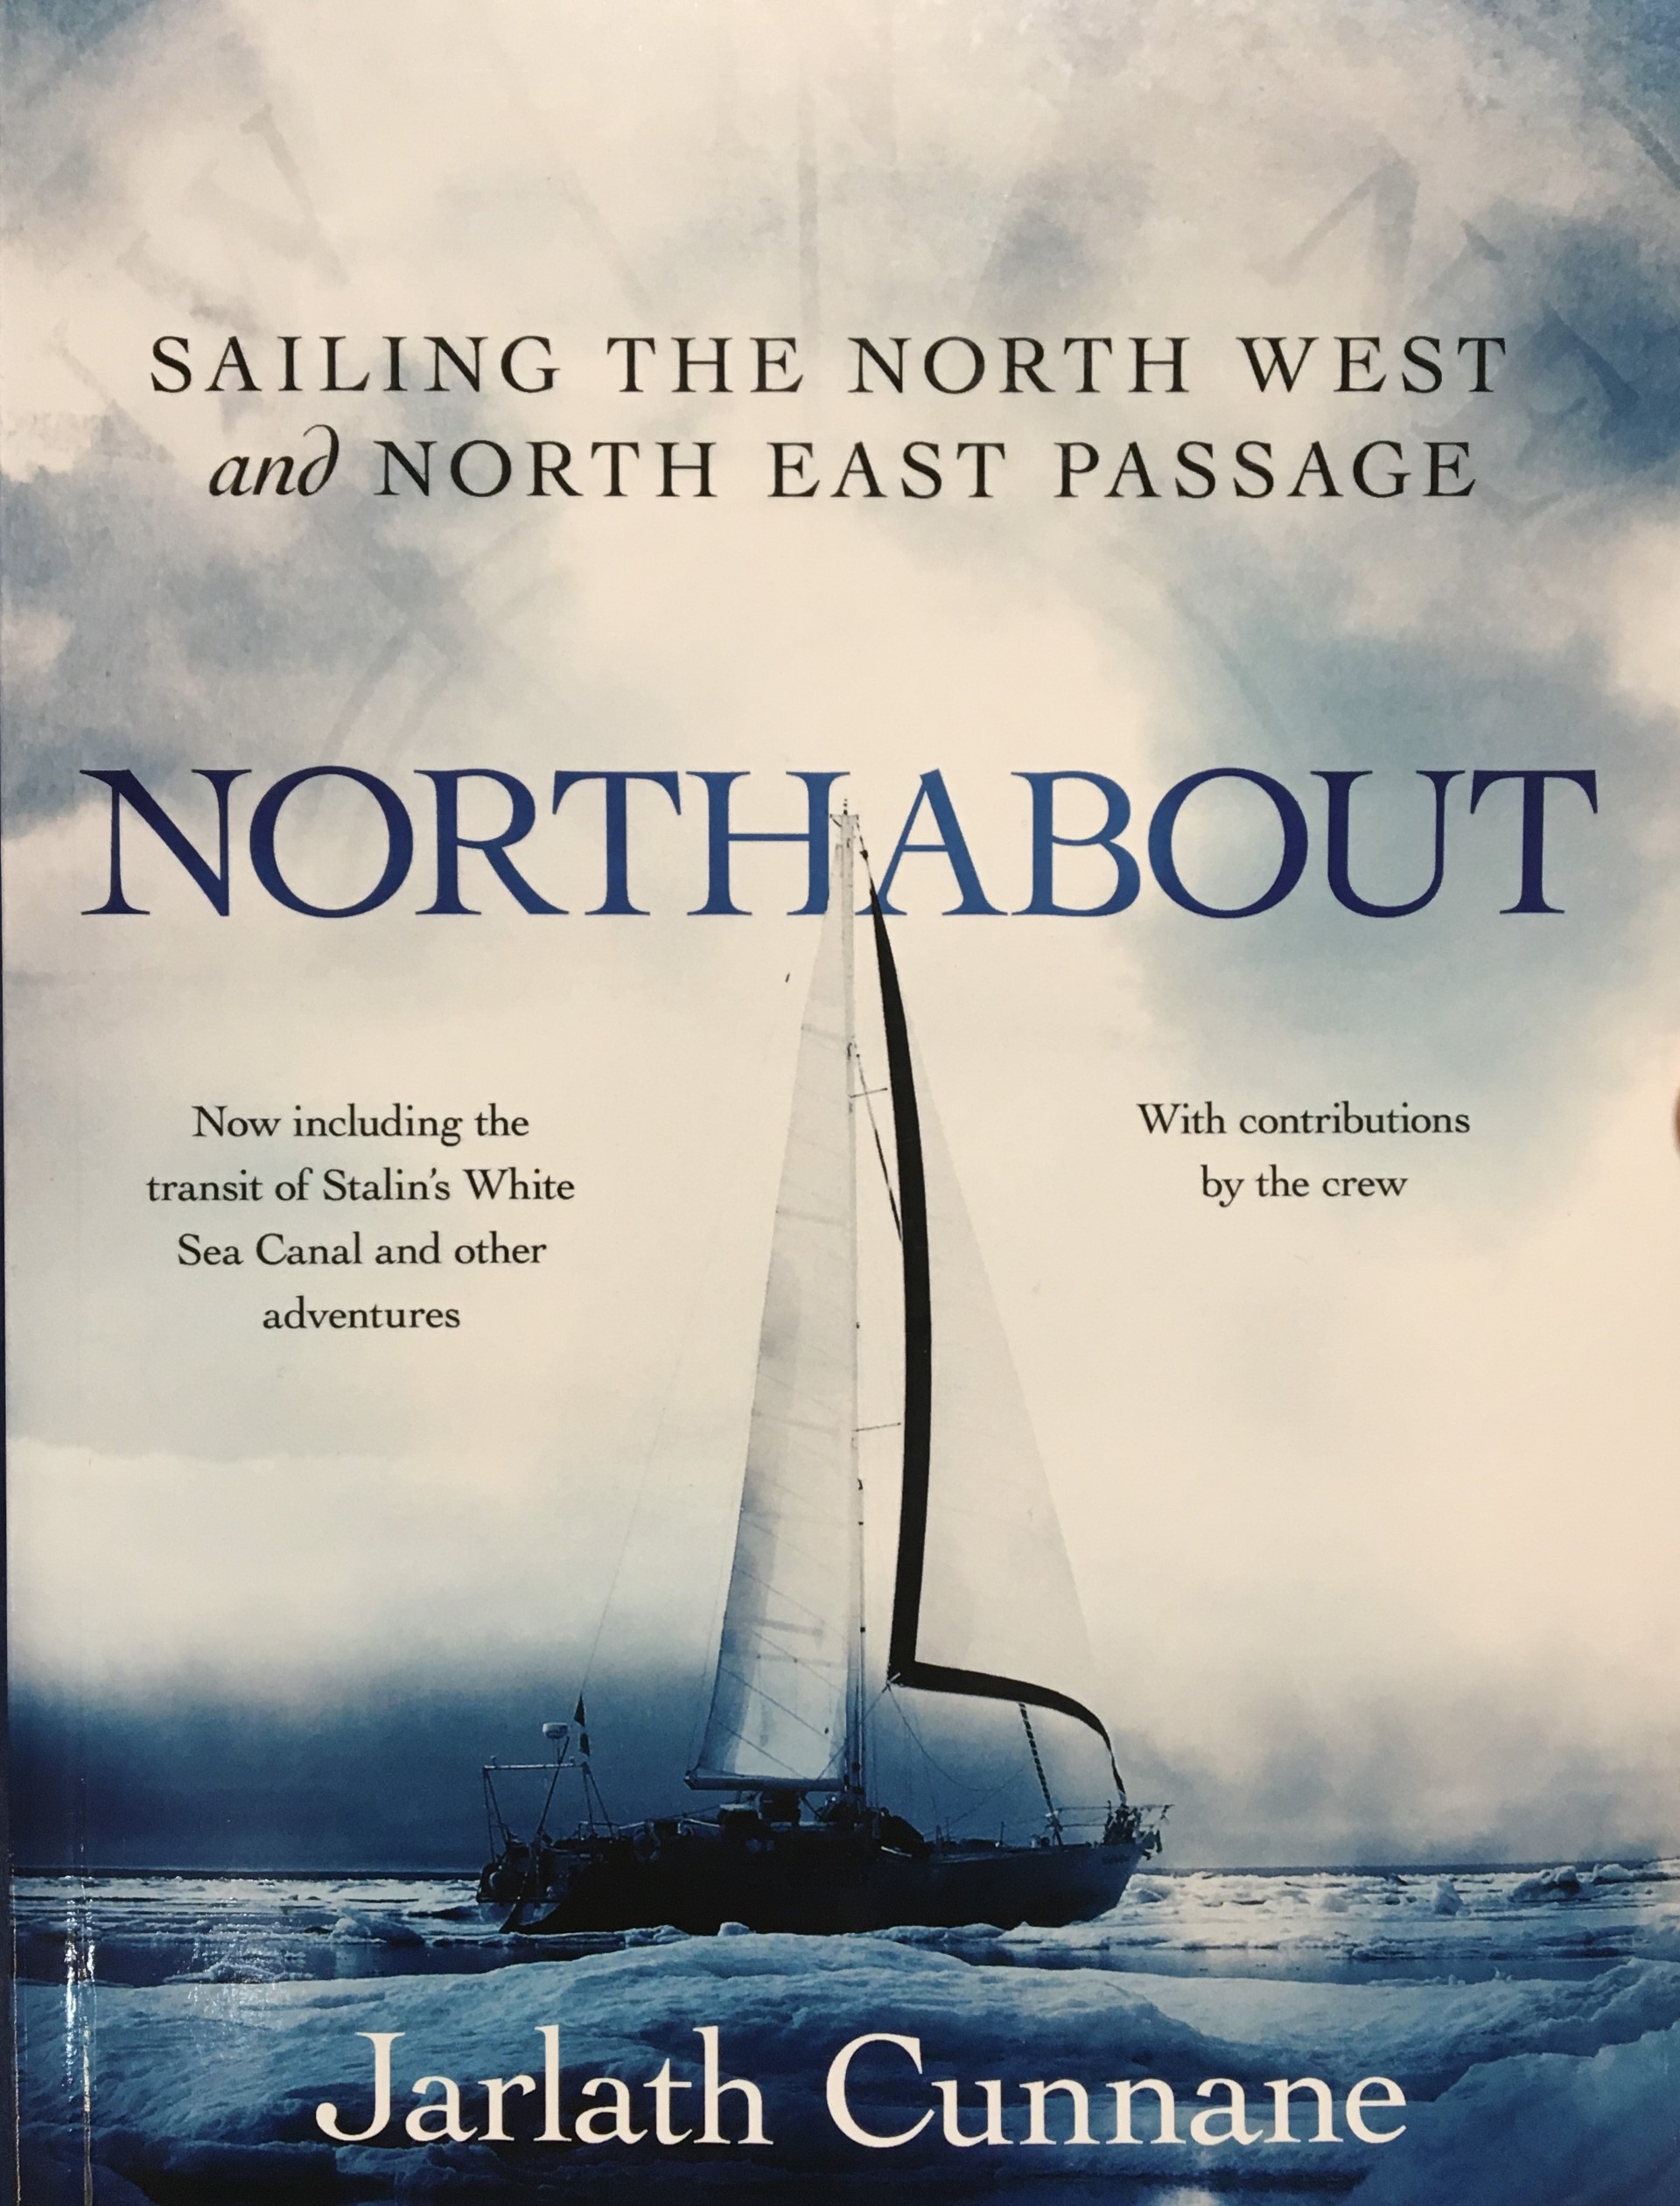 North About : Sailing the North West and North East Passage | Jarlath Cunnane | Charlie Byrne's